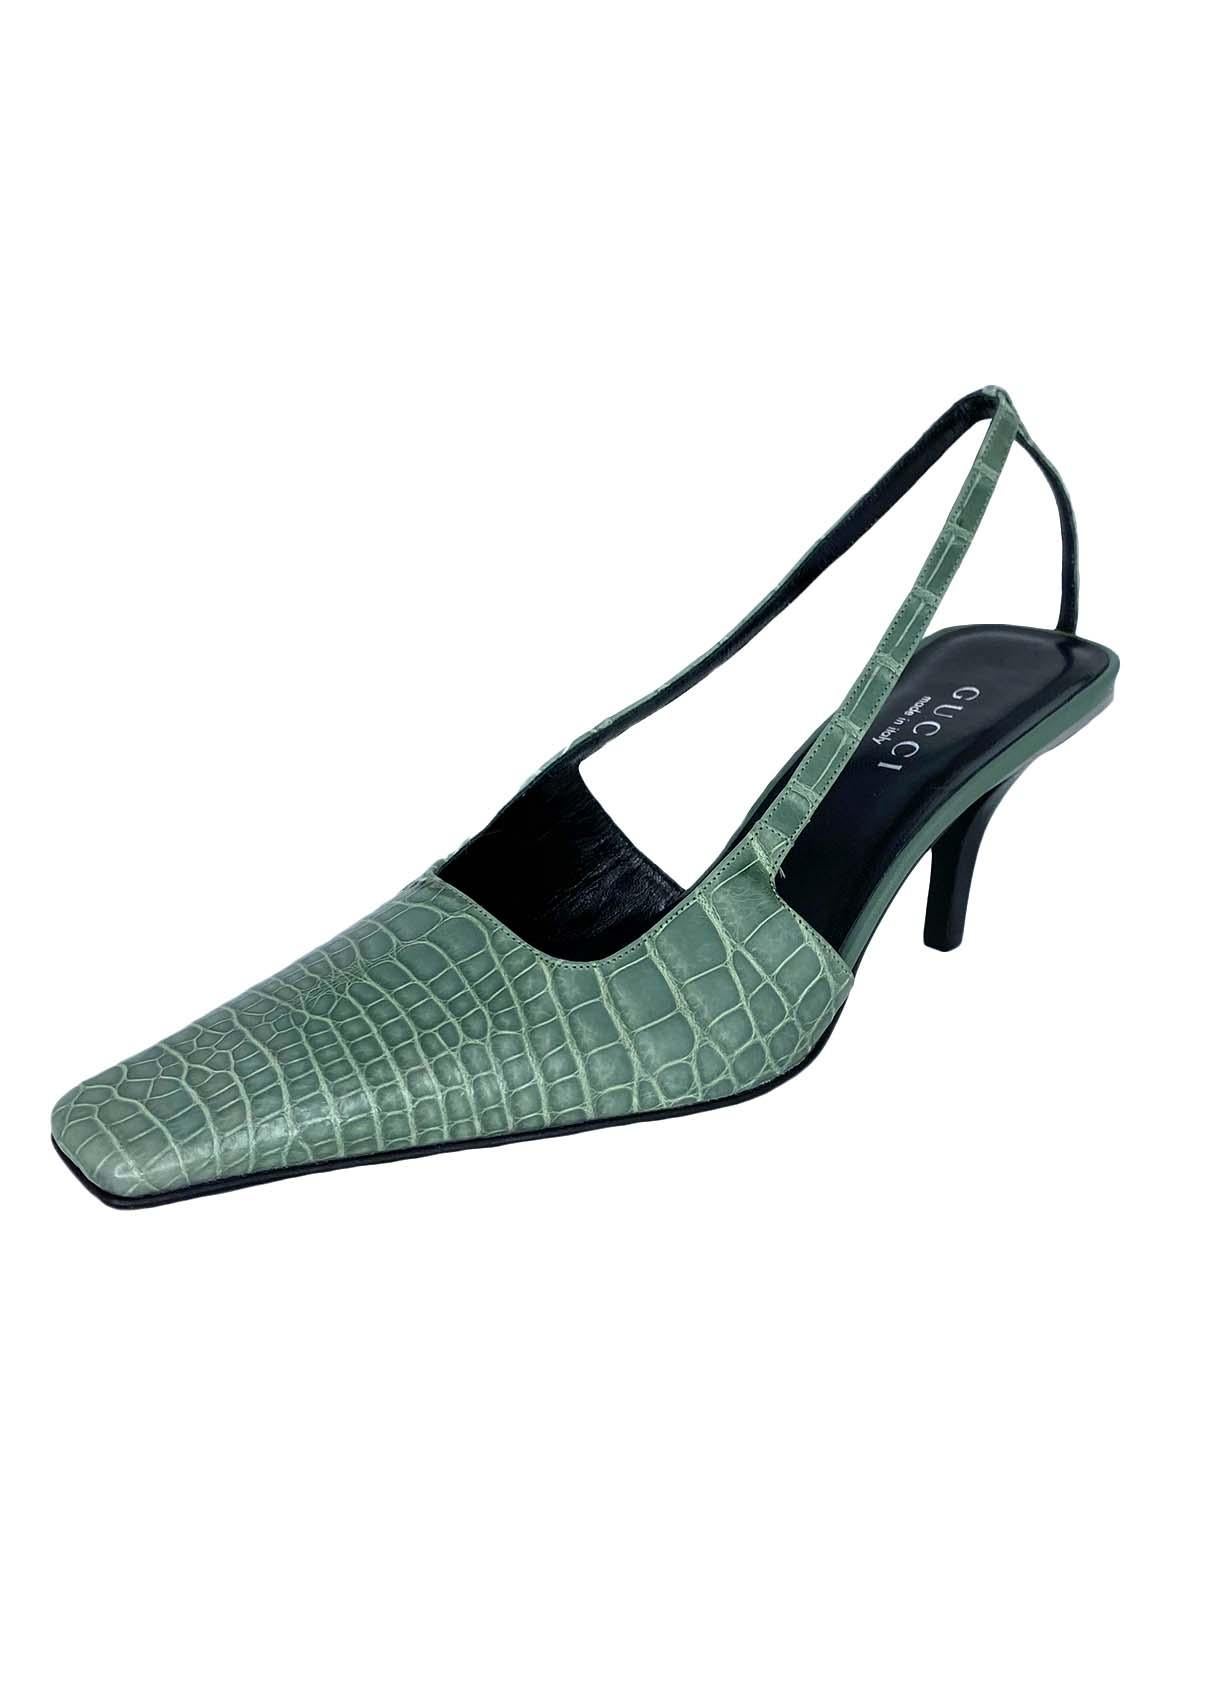 Gris S/S 1998 Gucci by Tom Ford Green Alligator Crystal G Square Toe Kitten Heels NWT en vente